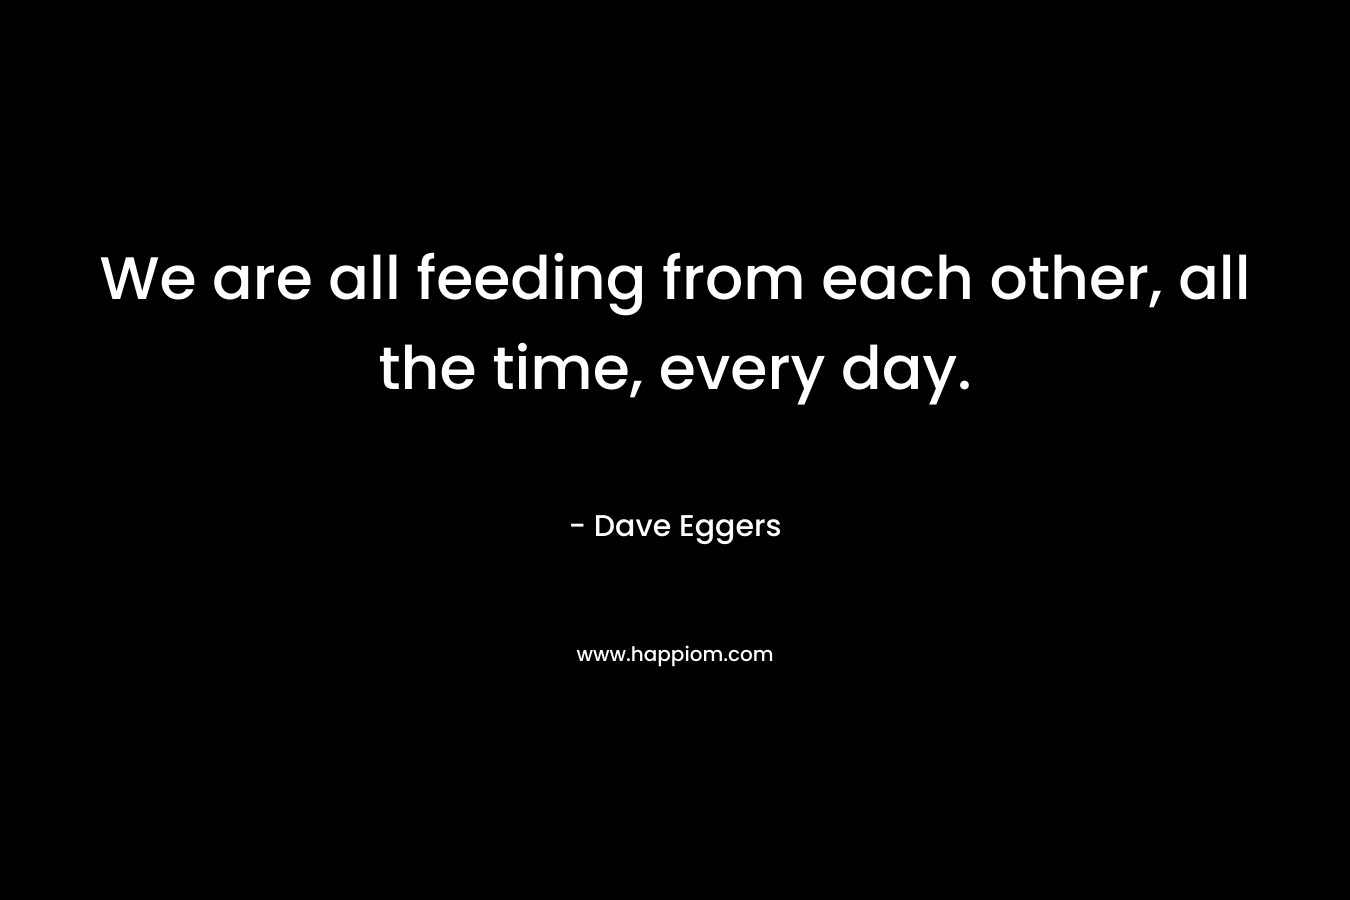 We are all feeding from each other, all the time, every day. – Dave Eggers